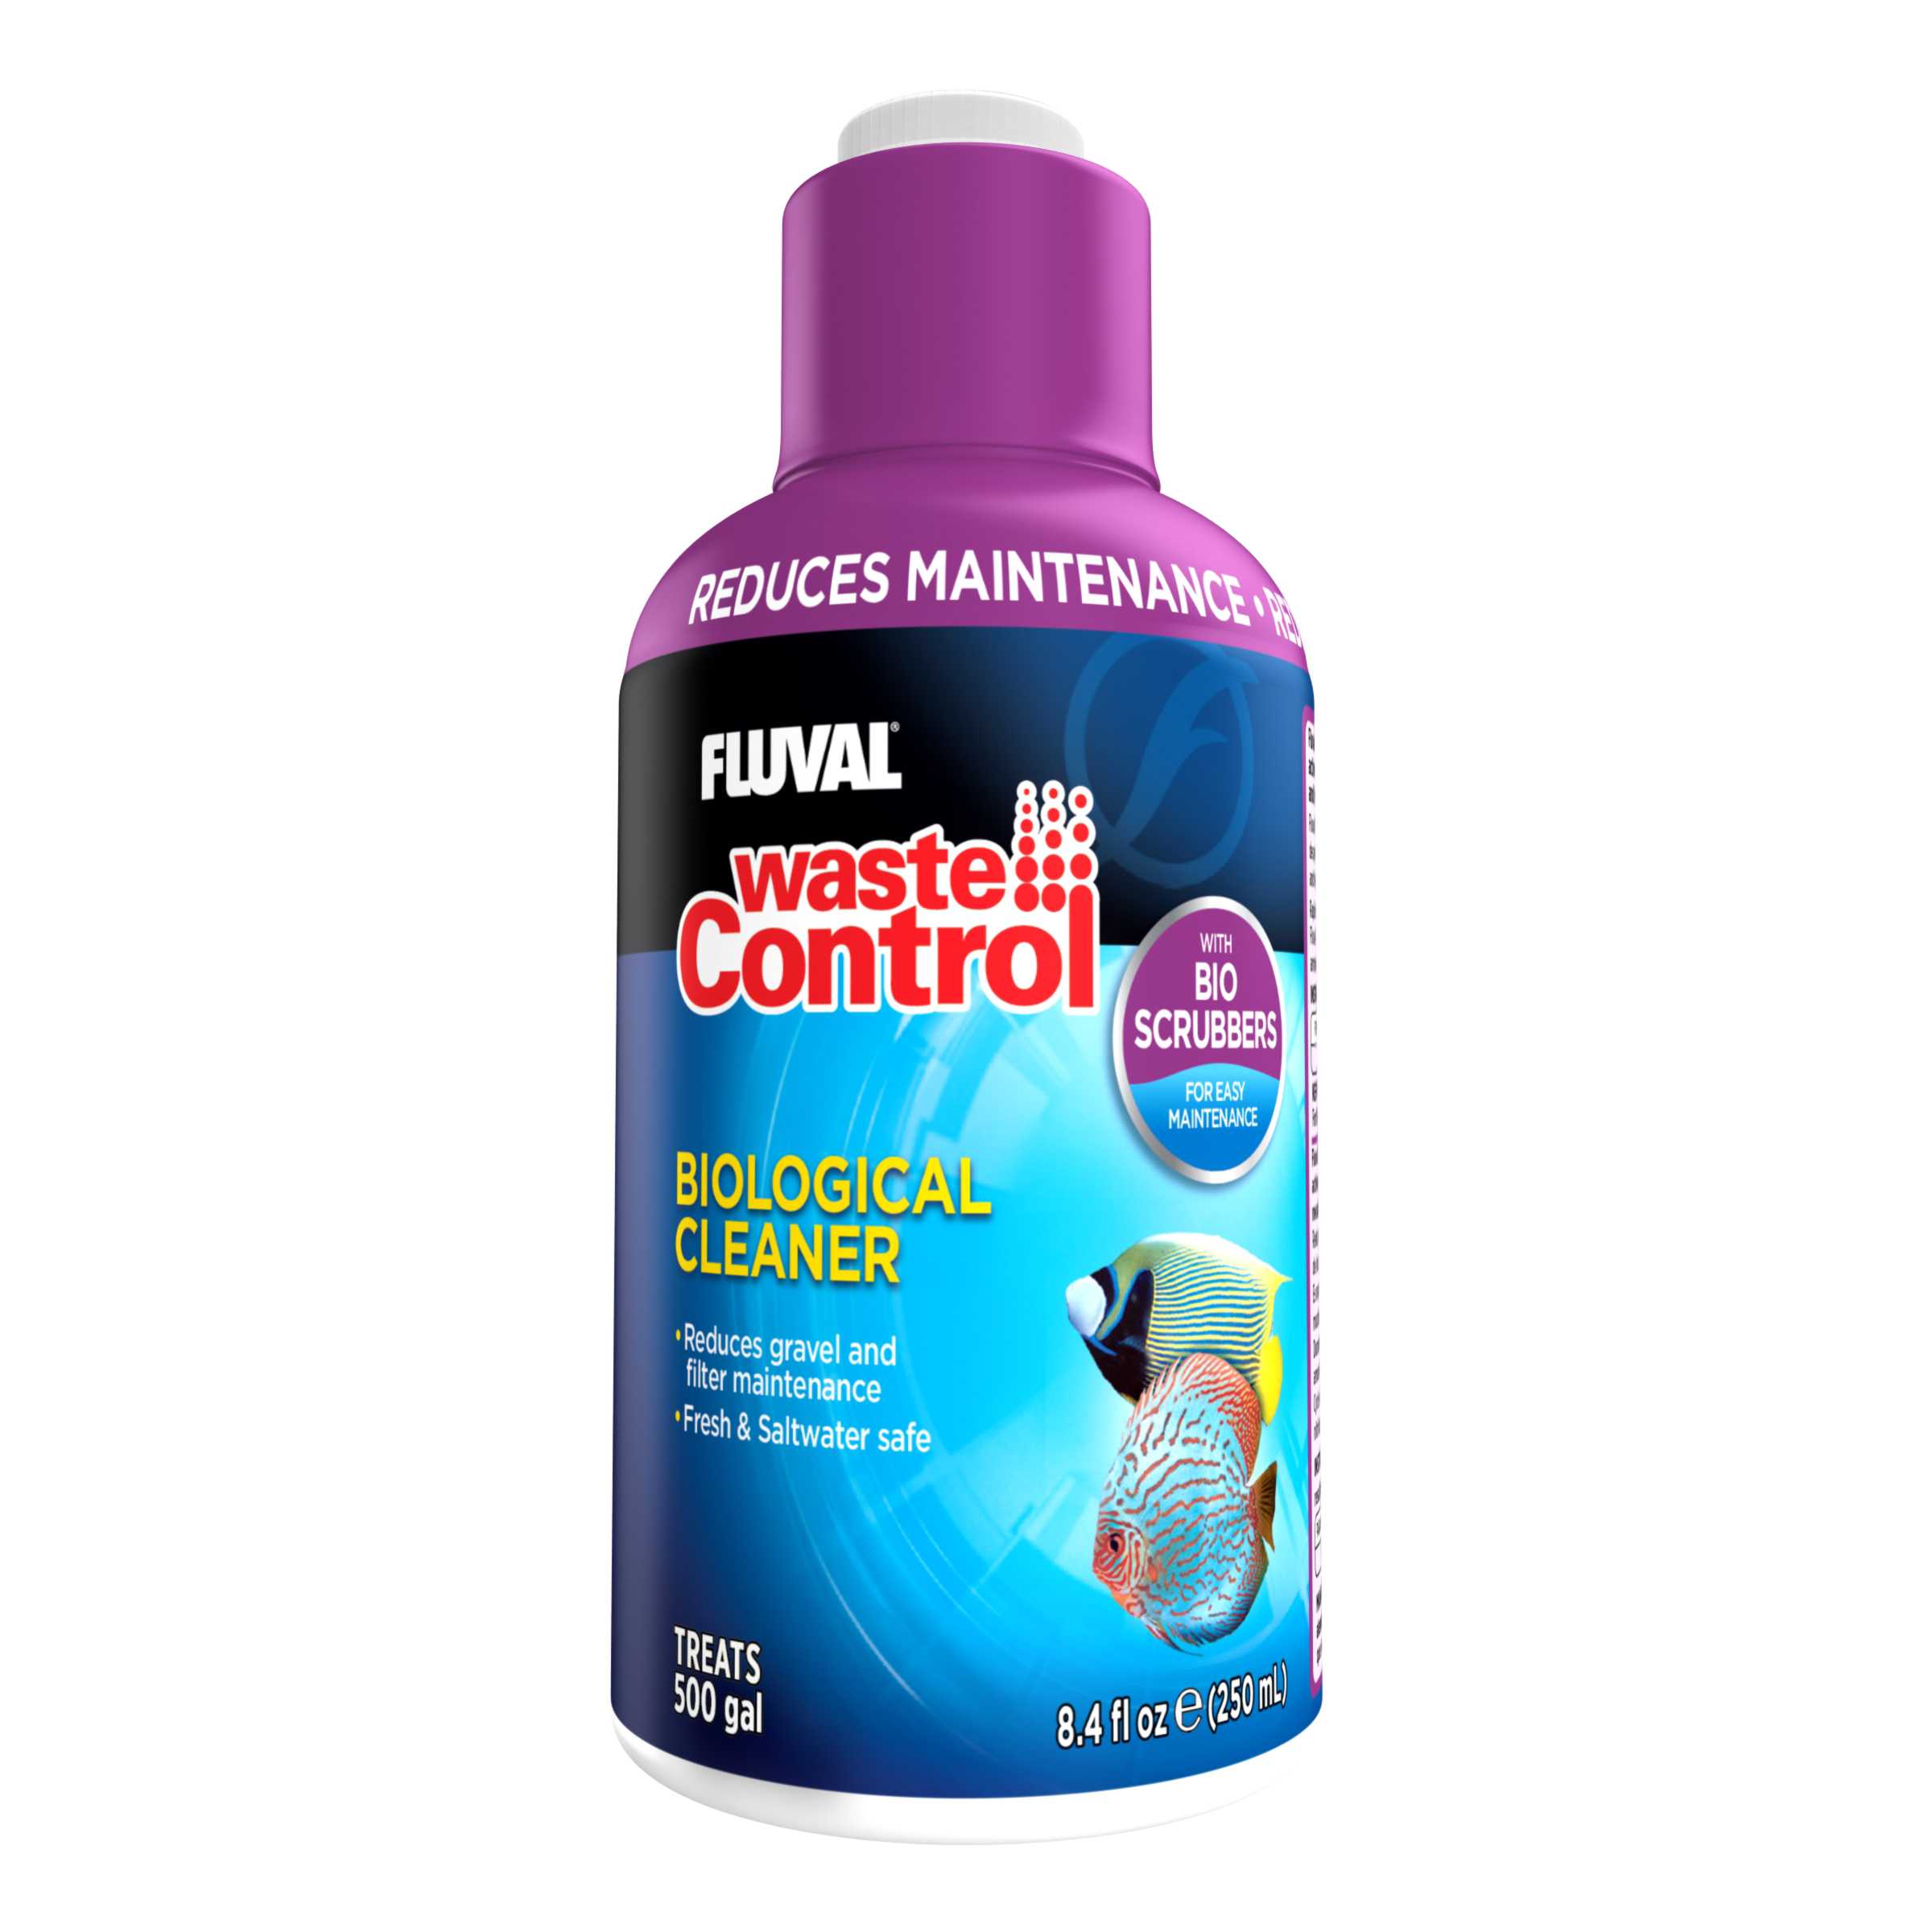 Fluval Waste Control Biological Aquarium Cleaner reduces organic waste and overall tank maintenance by effectively cleaning interior surfaces and is infused with Bio Scrubbers – beneficial bacteria that breaks down waste and promotes clean water and living conditions